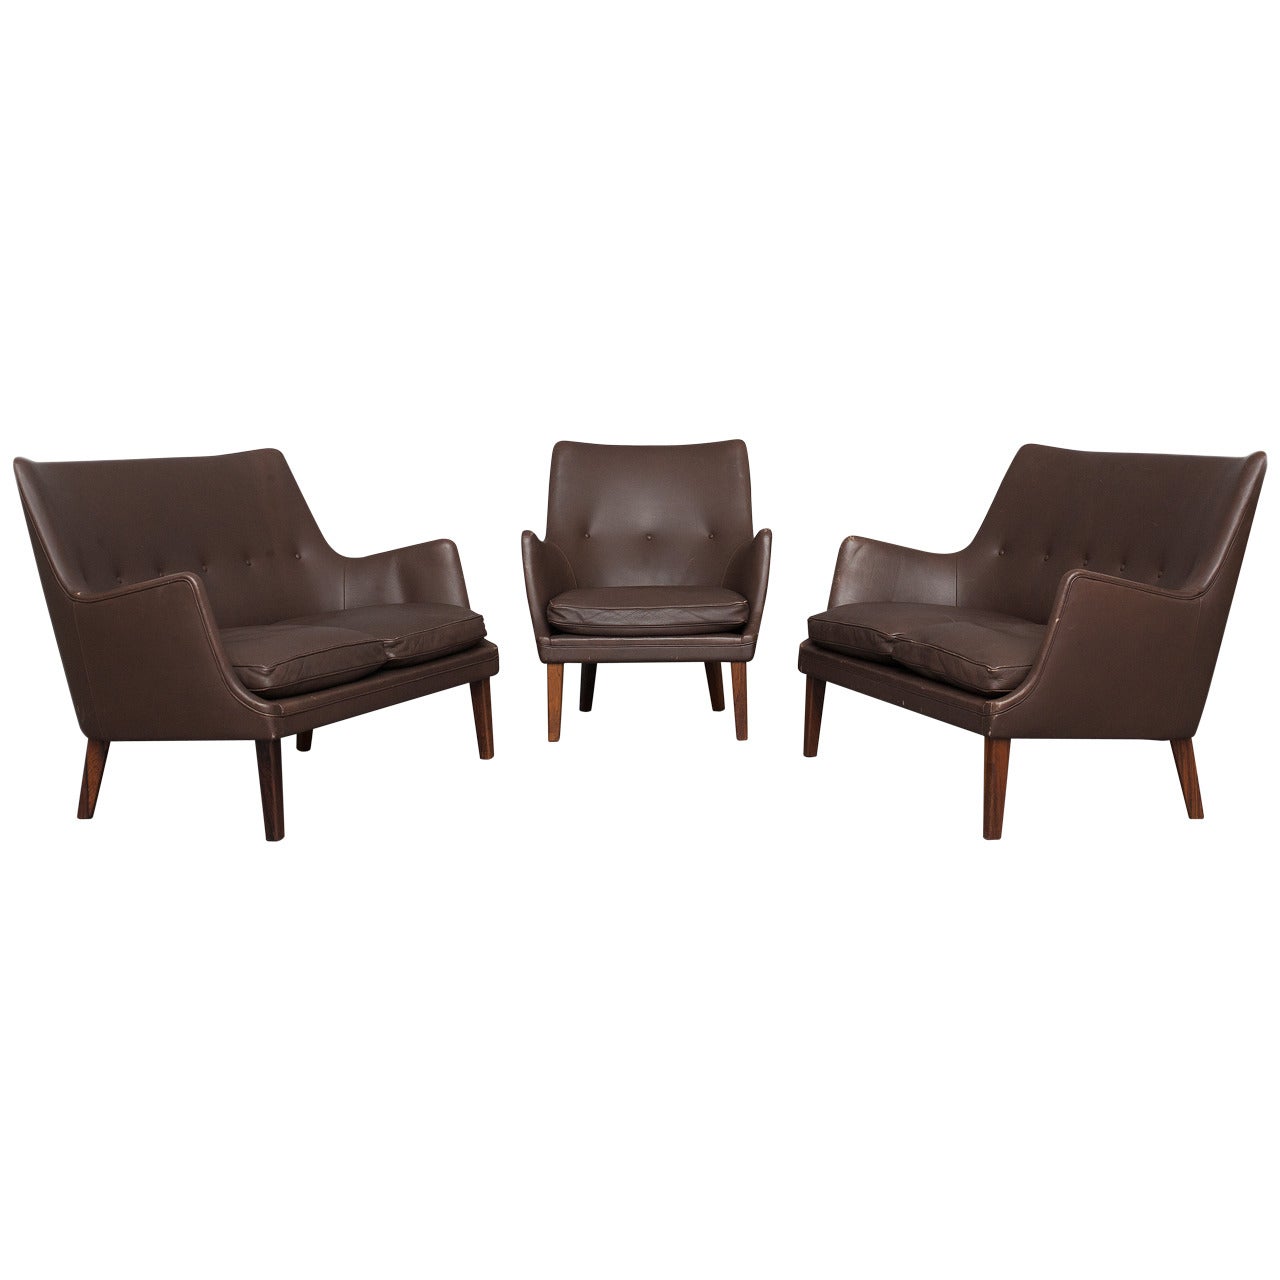 Pair of Sofas and Lounge Chair by Arne Vodder for Ivan Schlechter